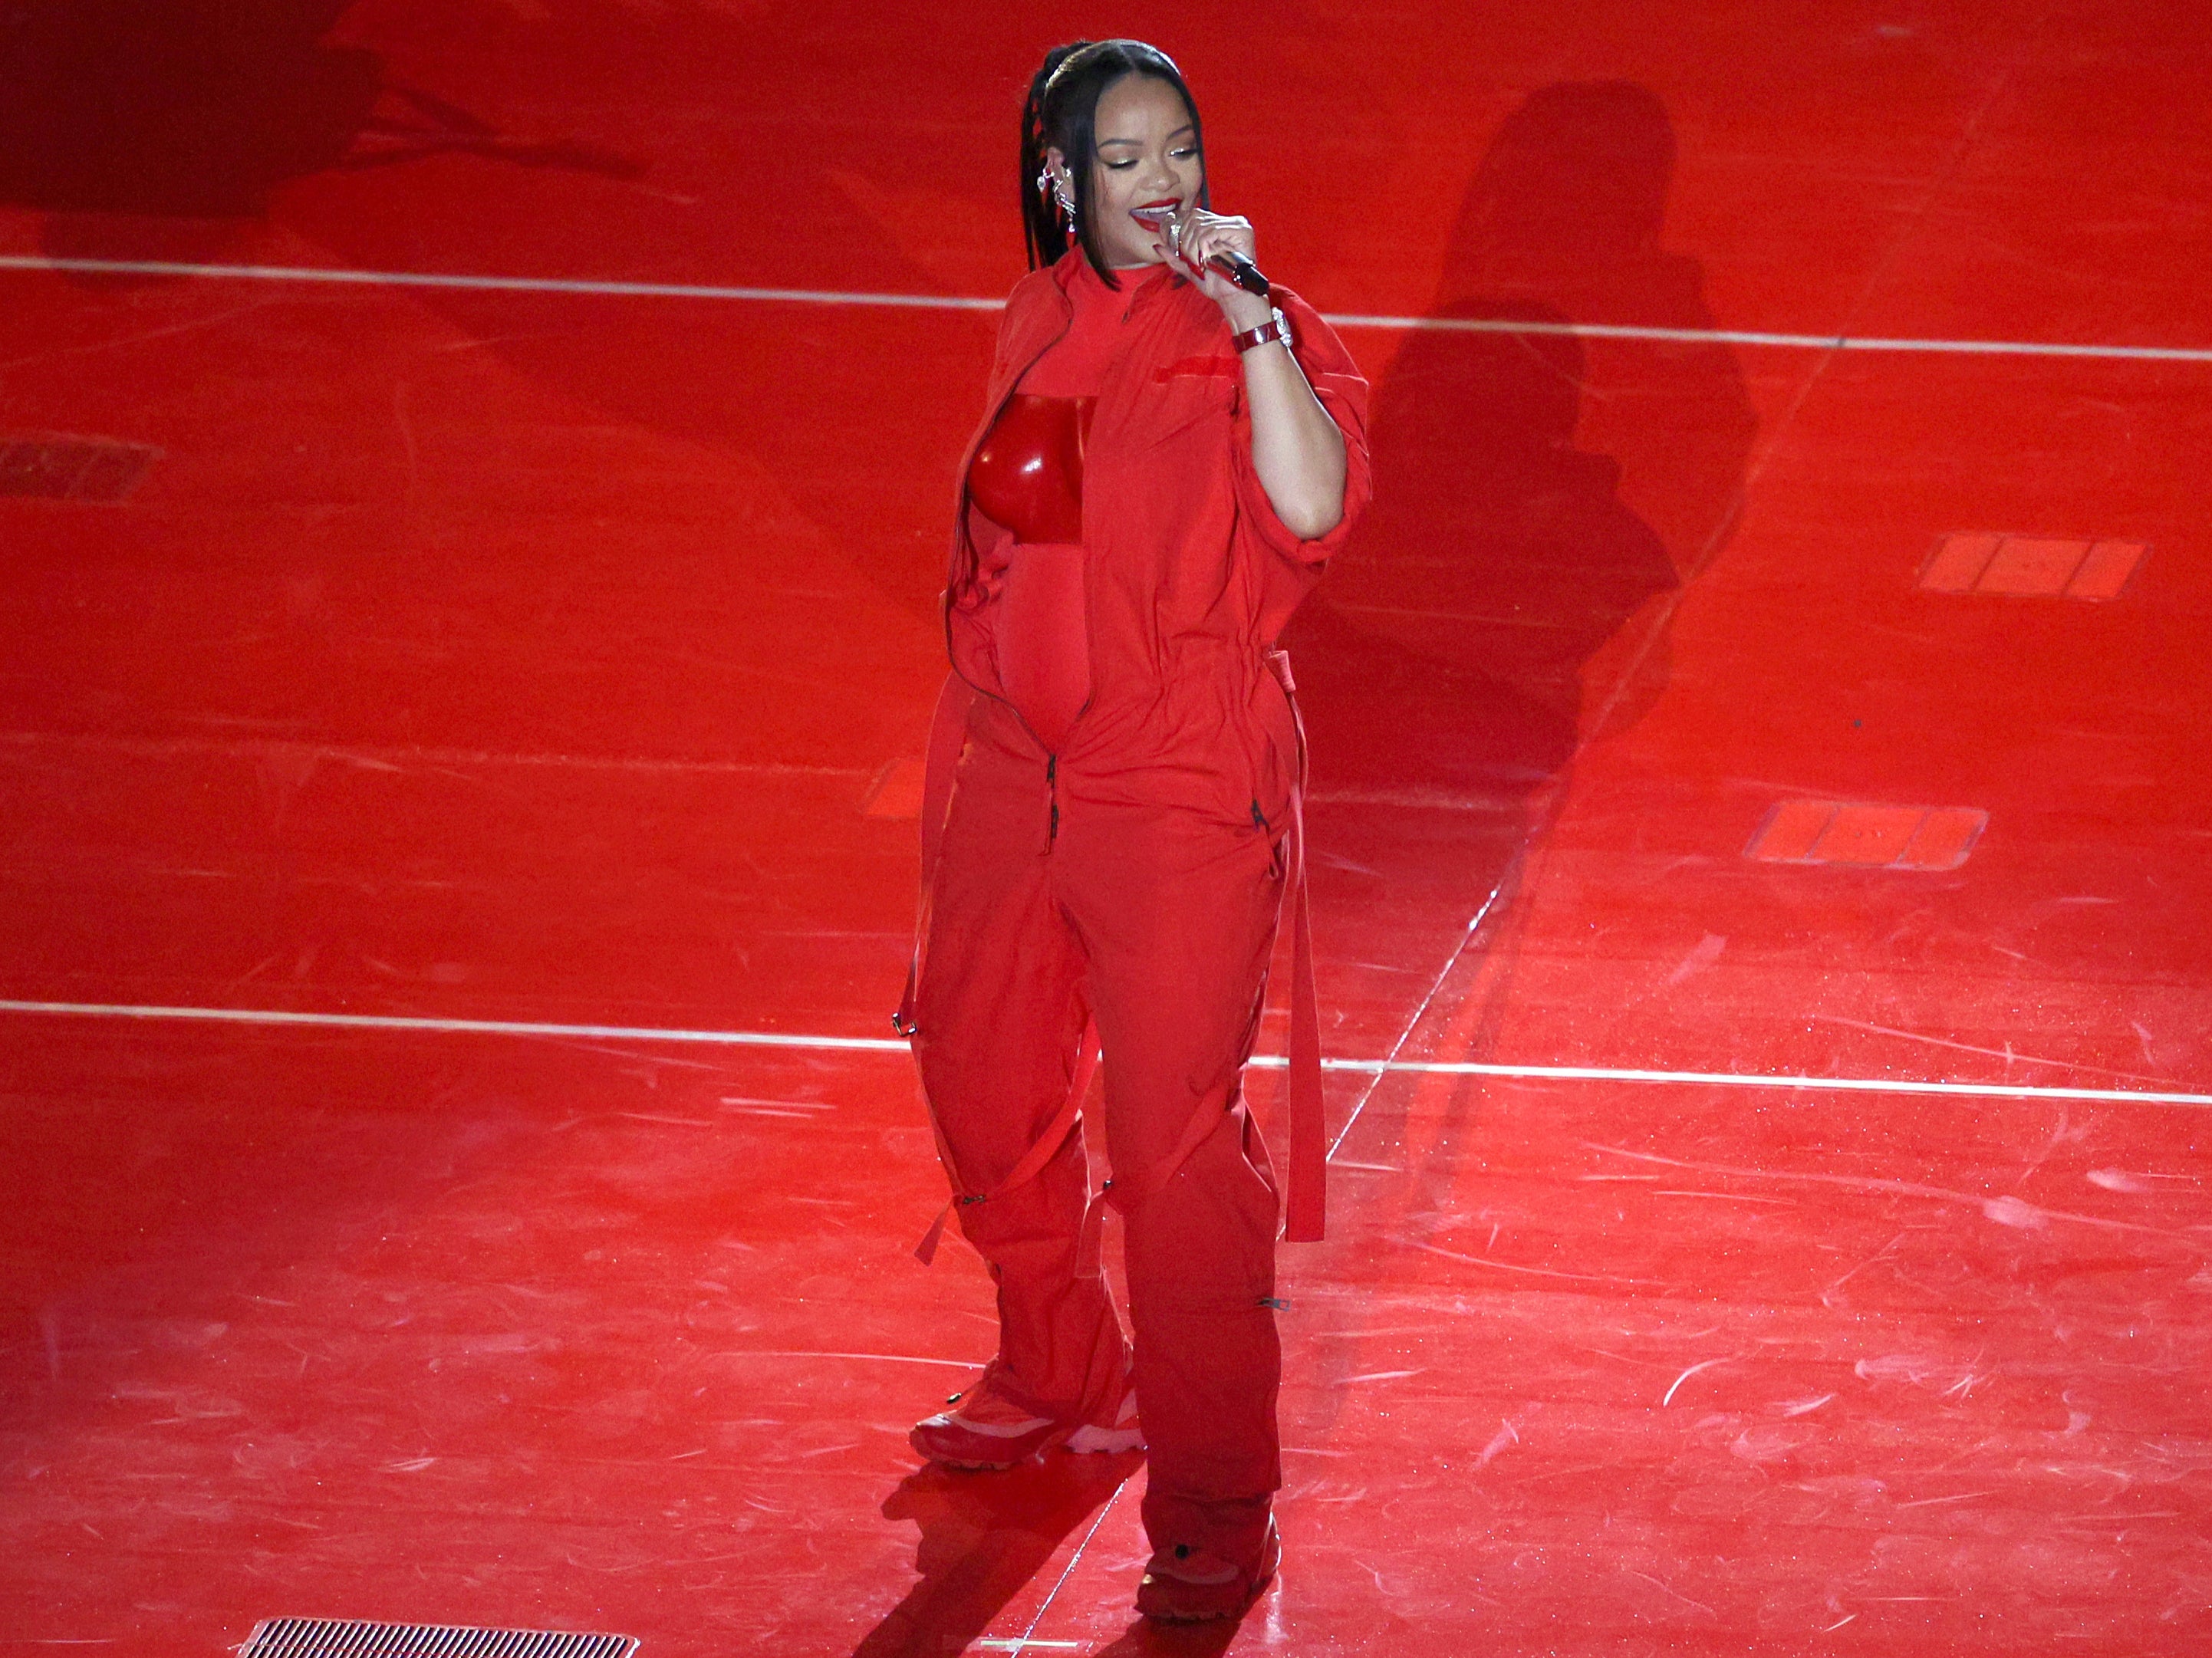 Rihanna performs during the Super Bowl LVII Halftime Show at State Farm Stadium on 12 February, 2023 in Glendale, Arizona